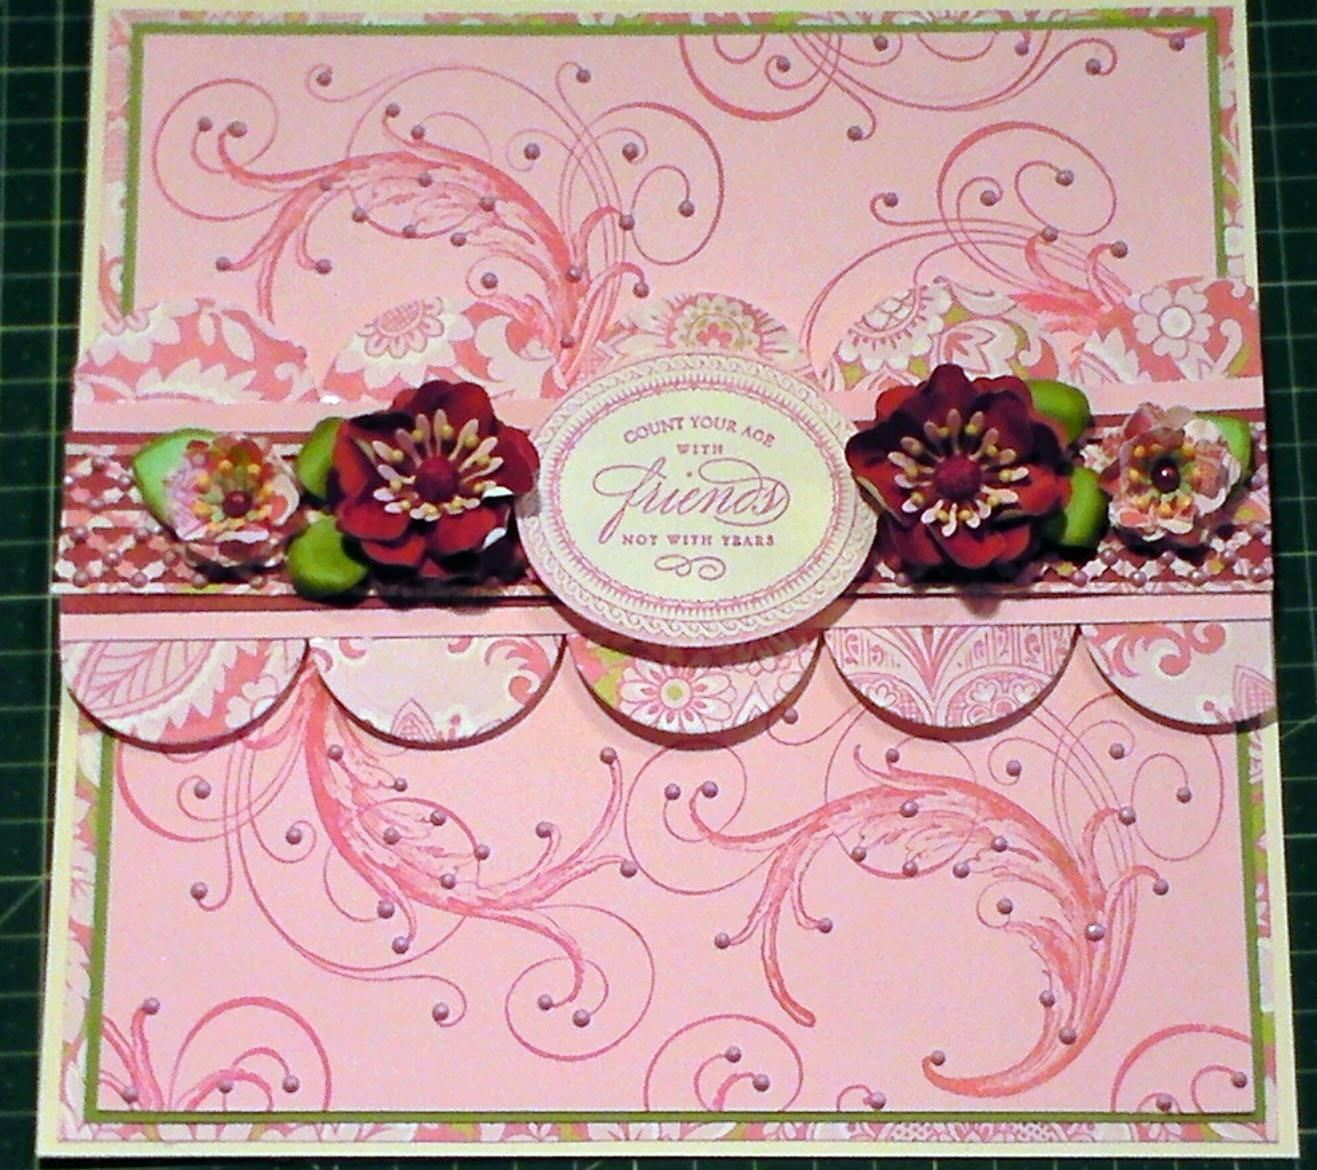 How to Make Gorgeous Pink Flourish Rubber Stamped Card